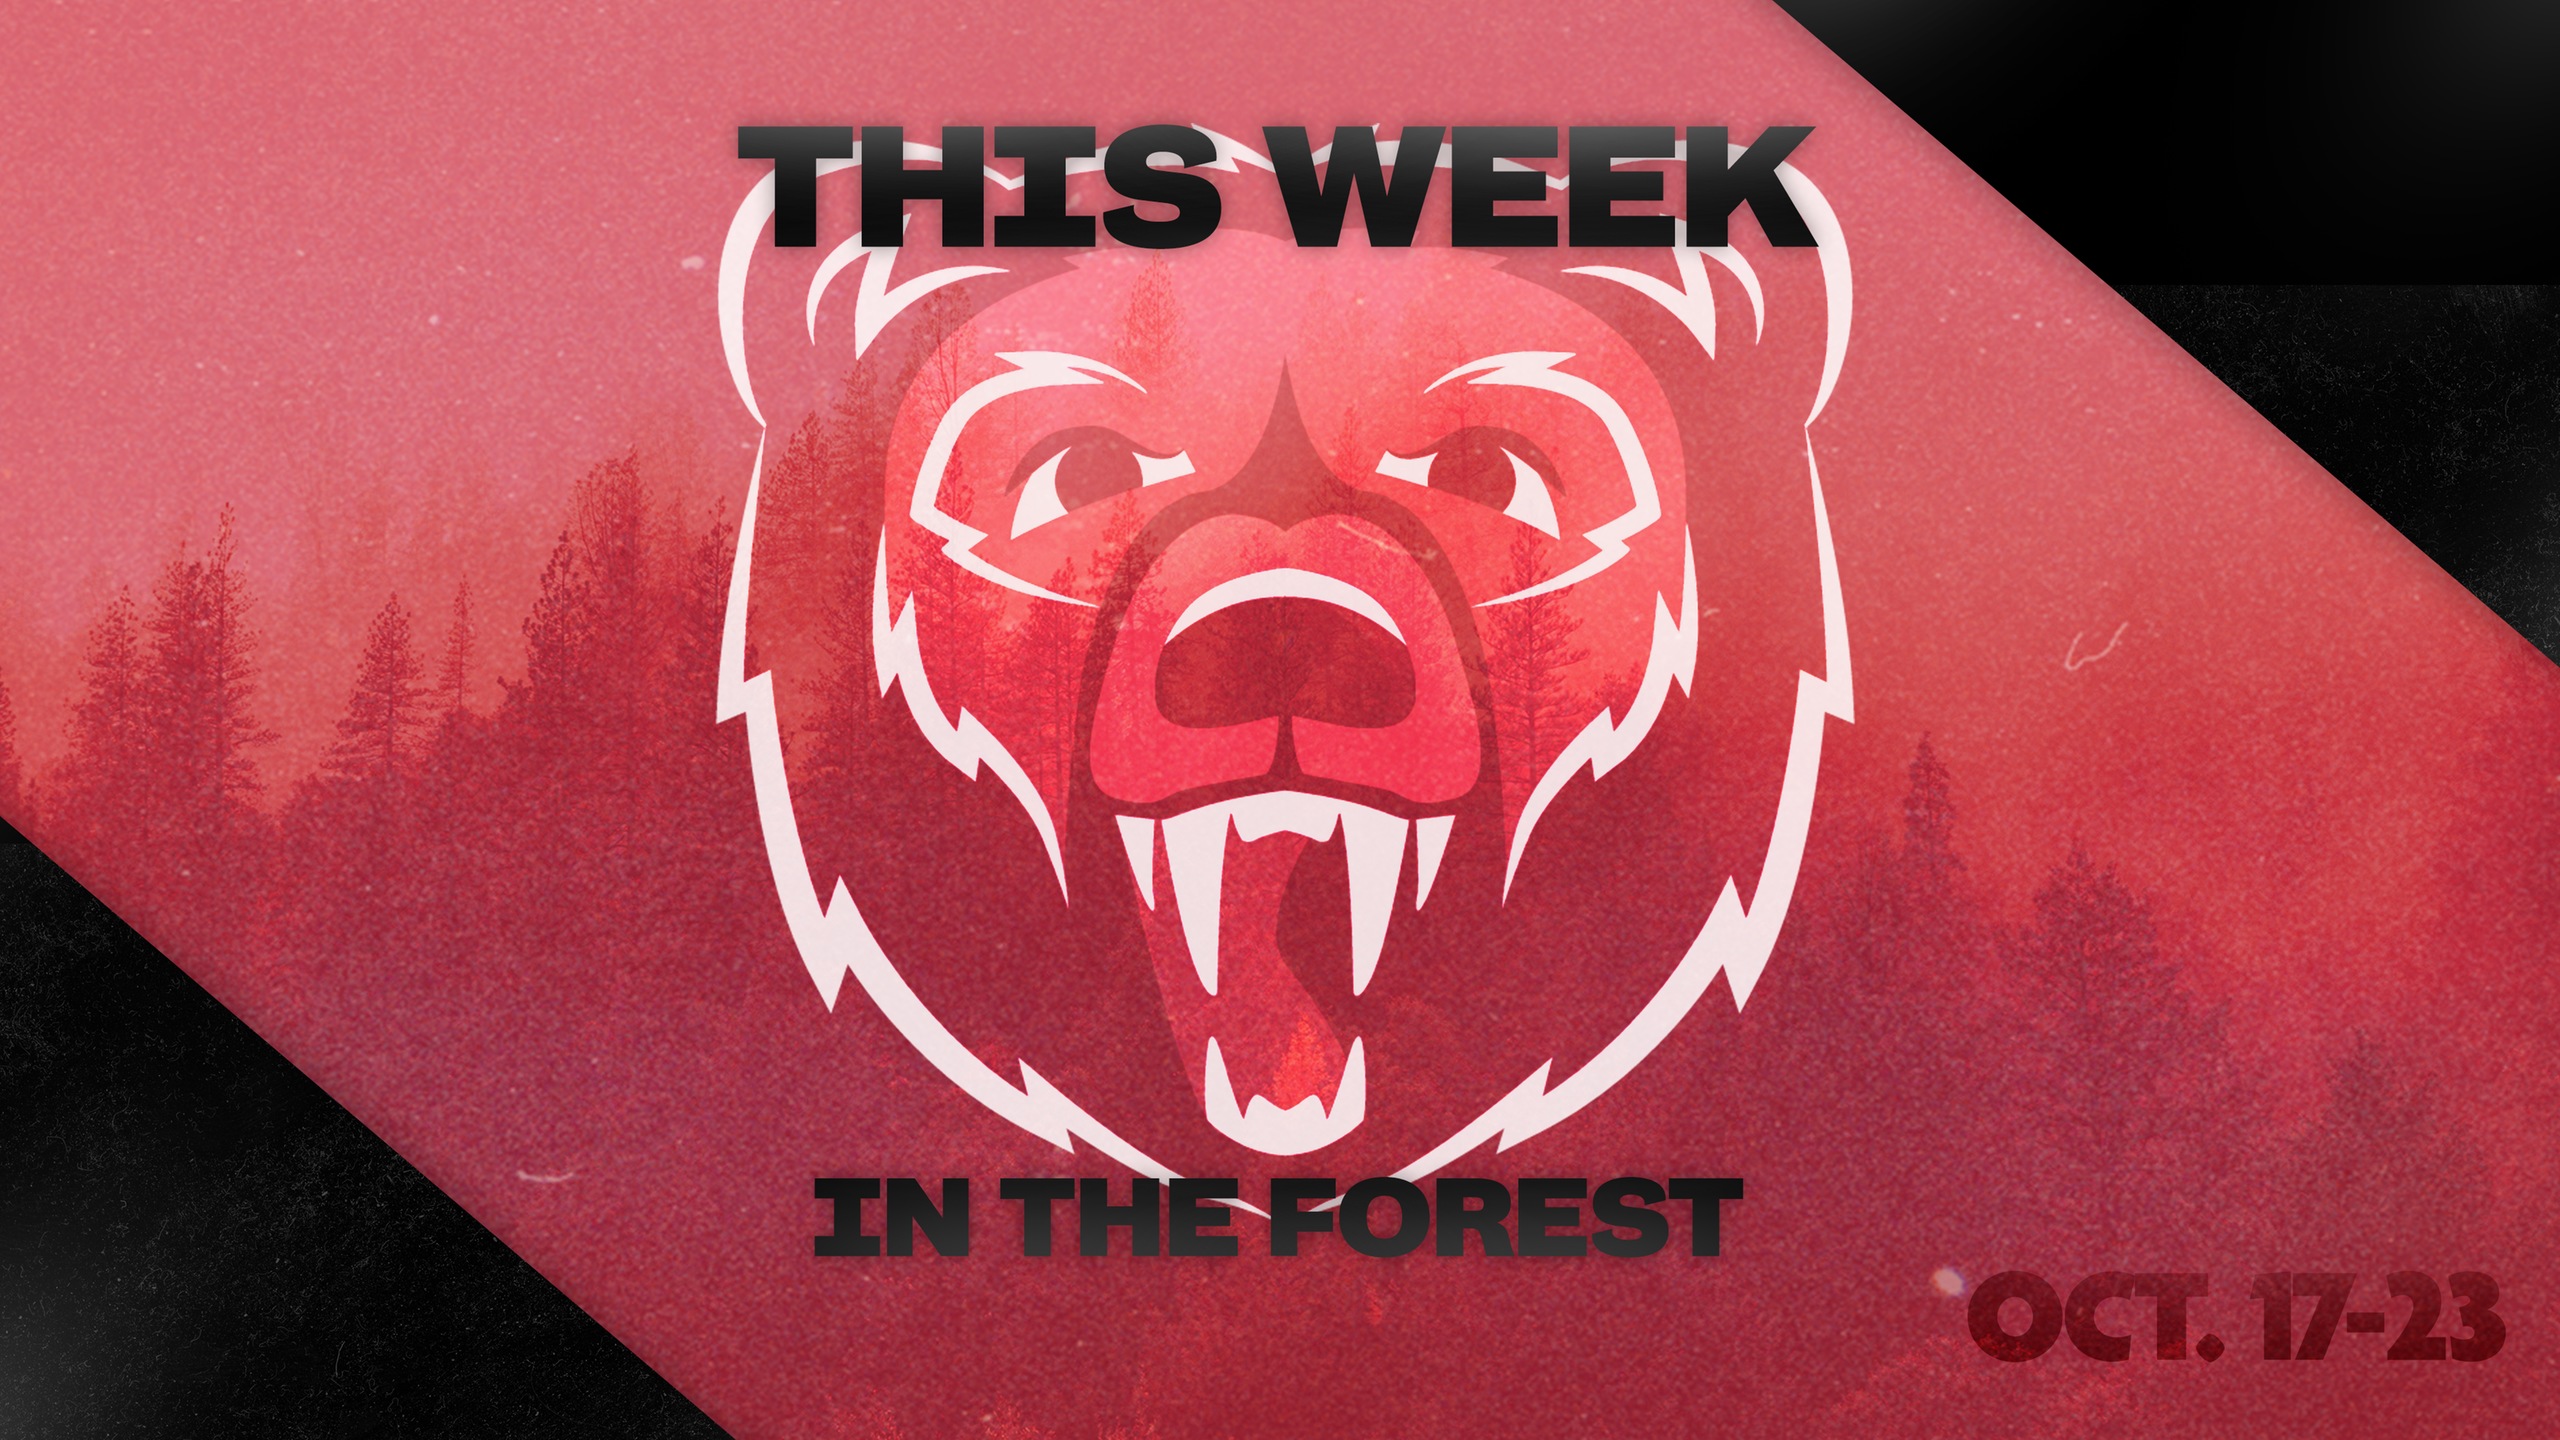 This Week in The Forest: Oct. 17-23